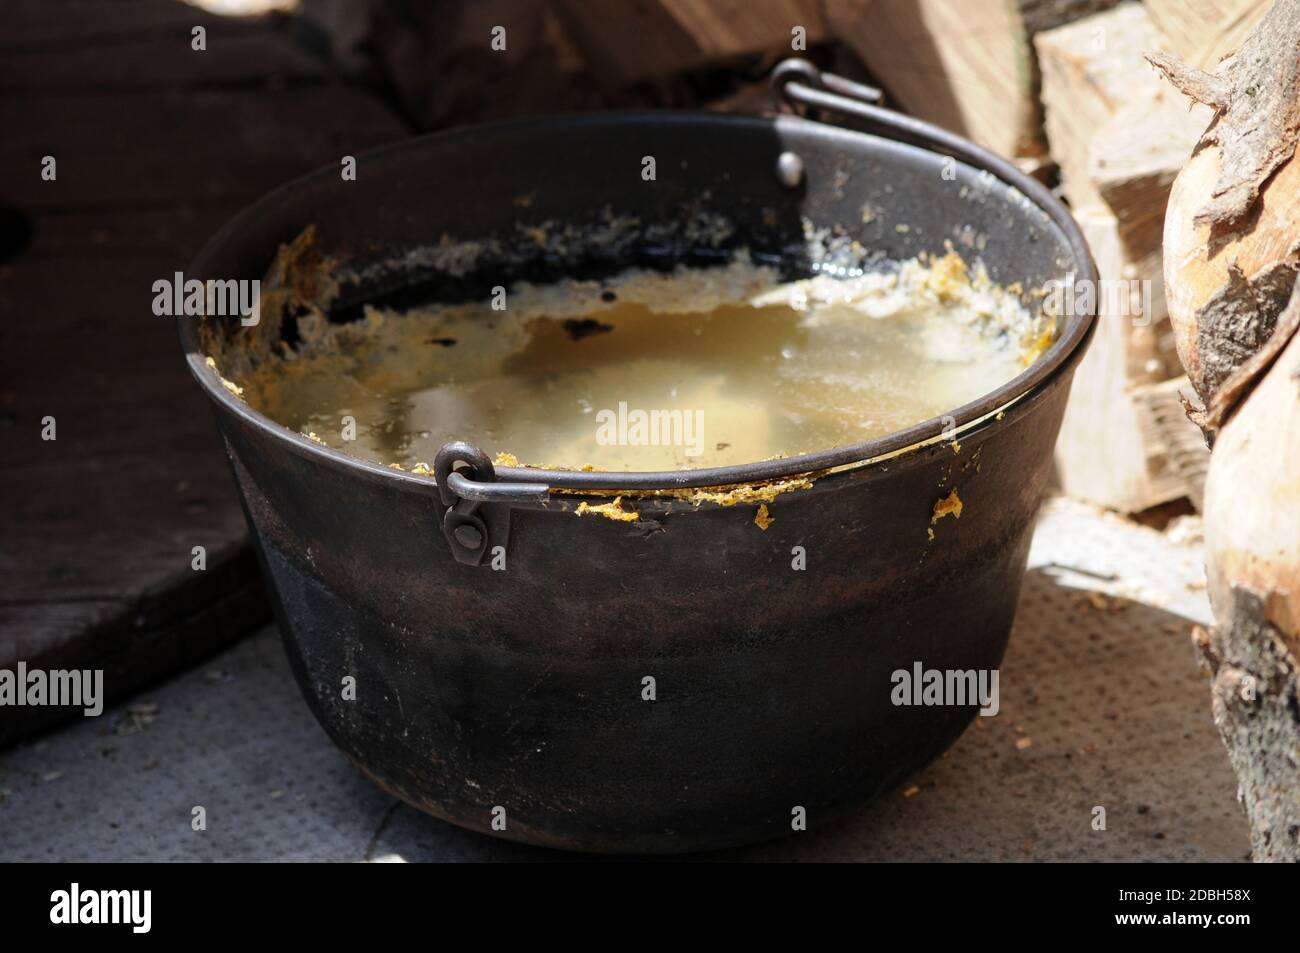 https://c8.alamy.com/comp/2DBH58X/cleaning-the-typical-pot-for-cooking-polenta-2DBH58X.jpg